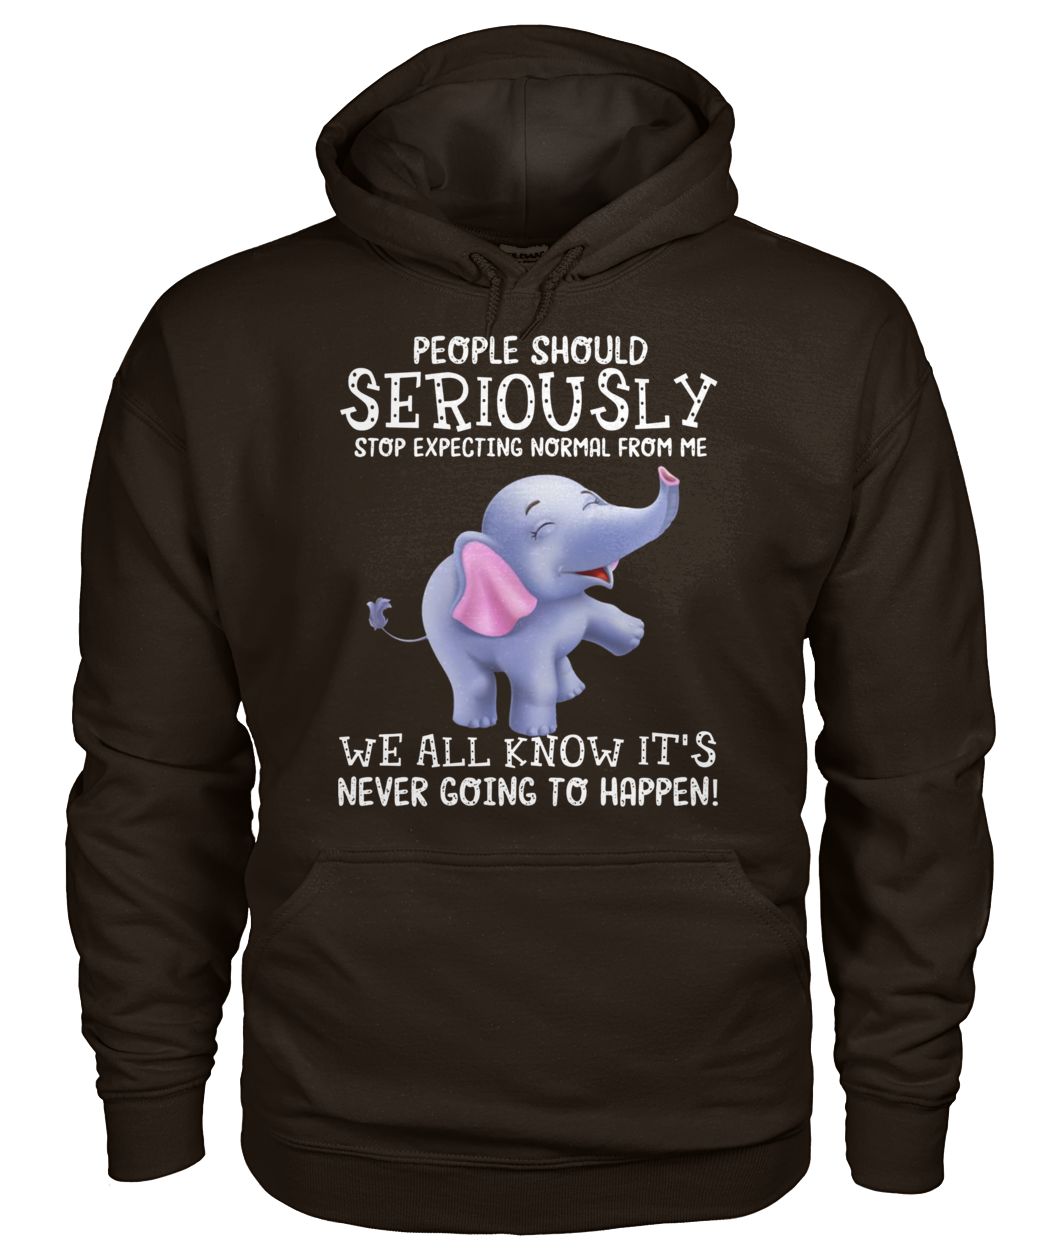 People should seriously stop expecting normal from me baby elephant gildan hoodie